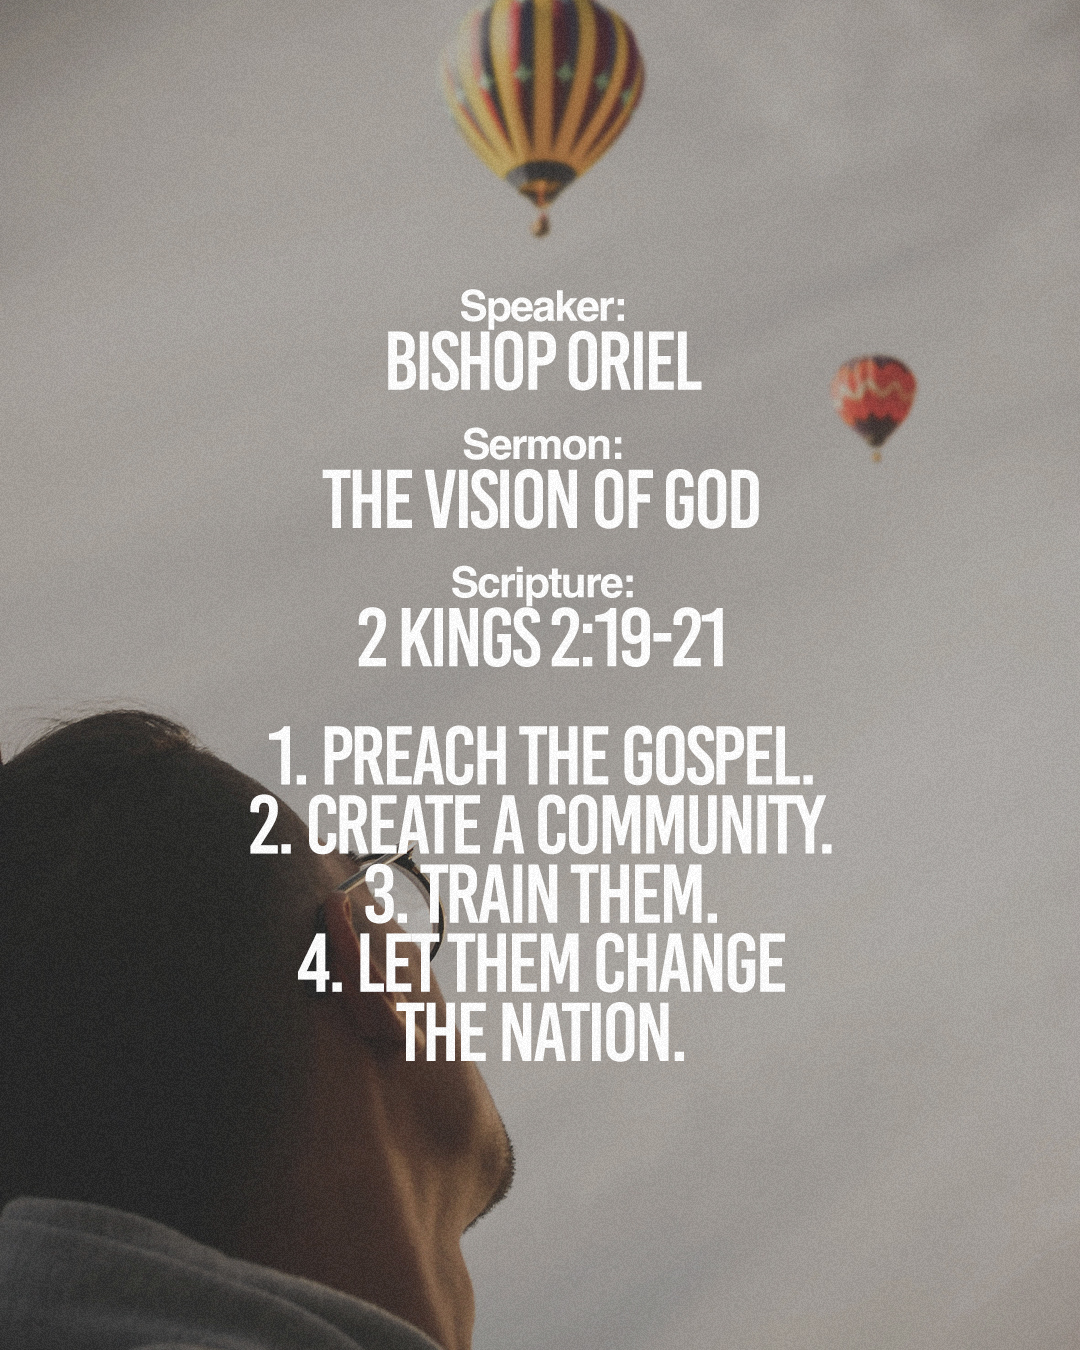 Shareable Quote for Sermon: Catch the Vision